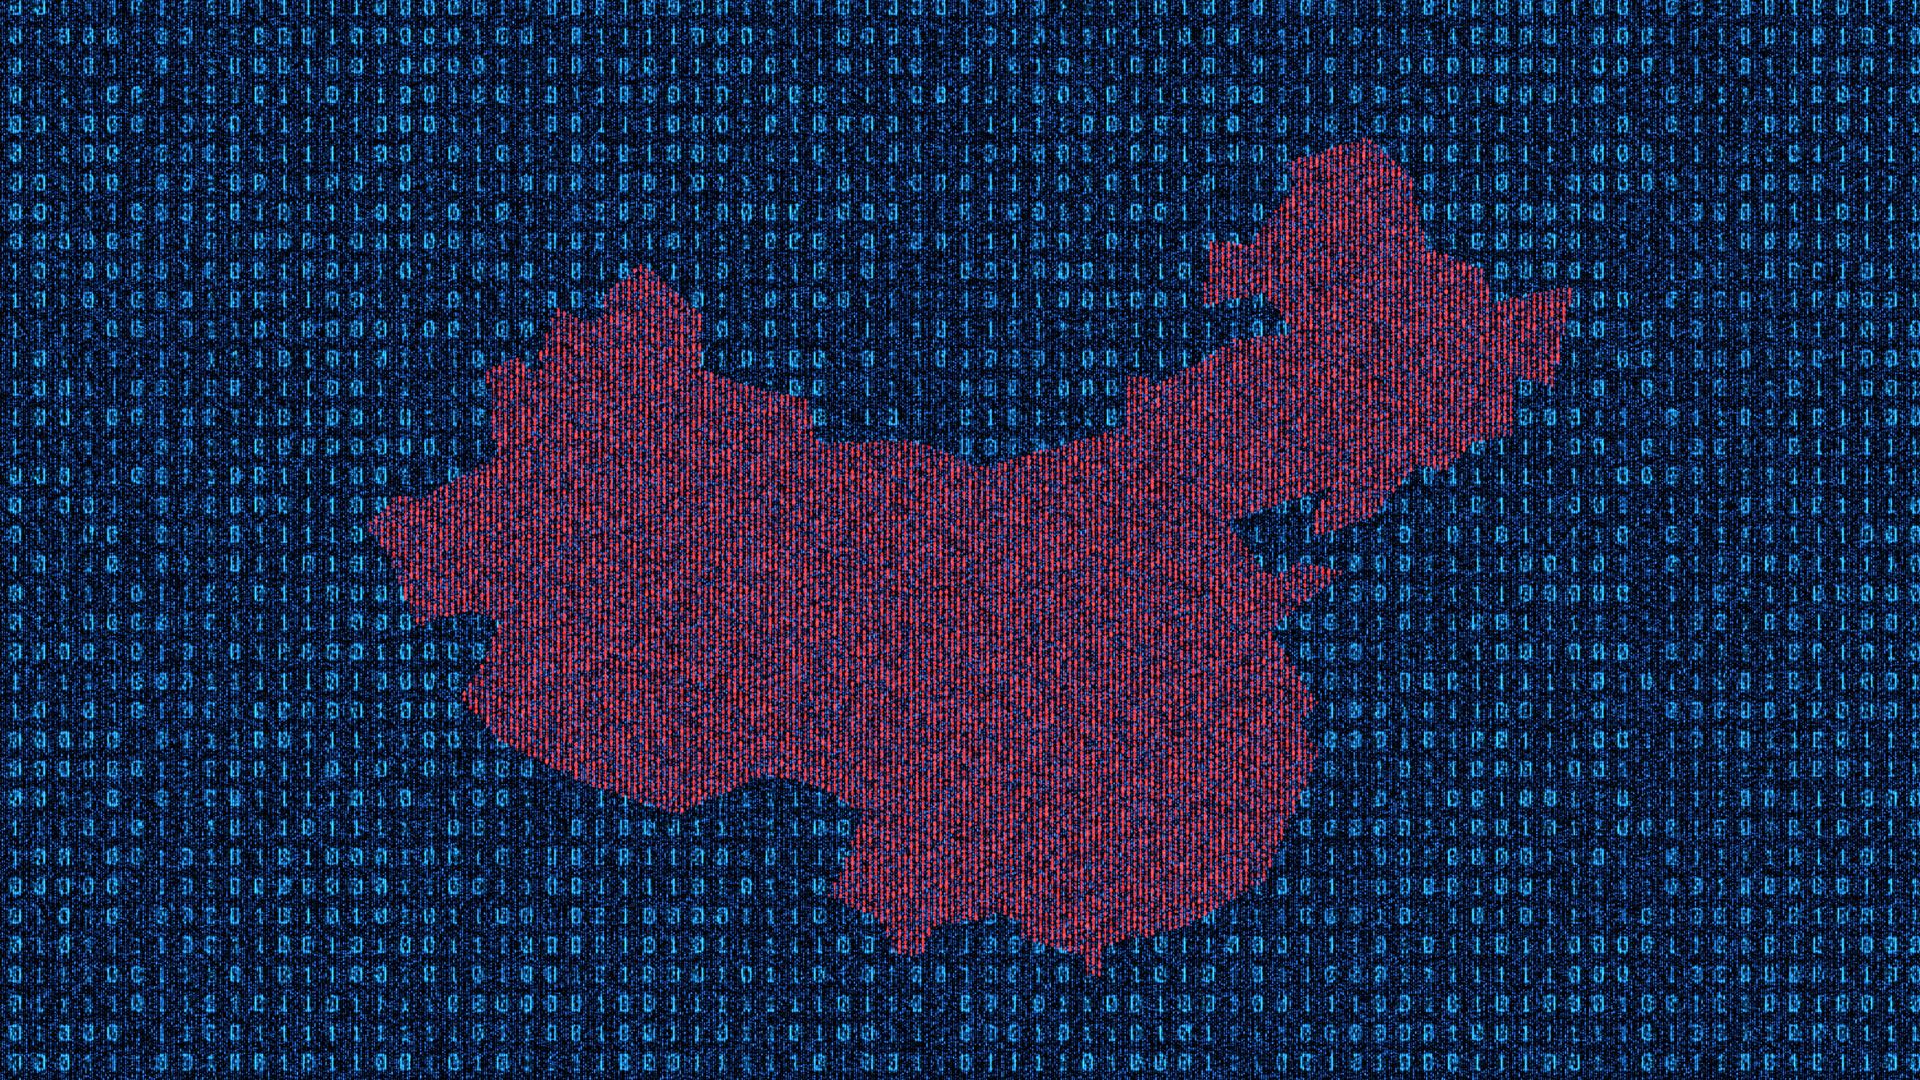 Illustration of a map of china in computer code